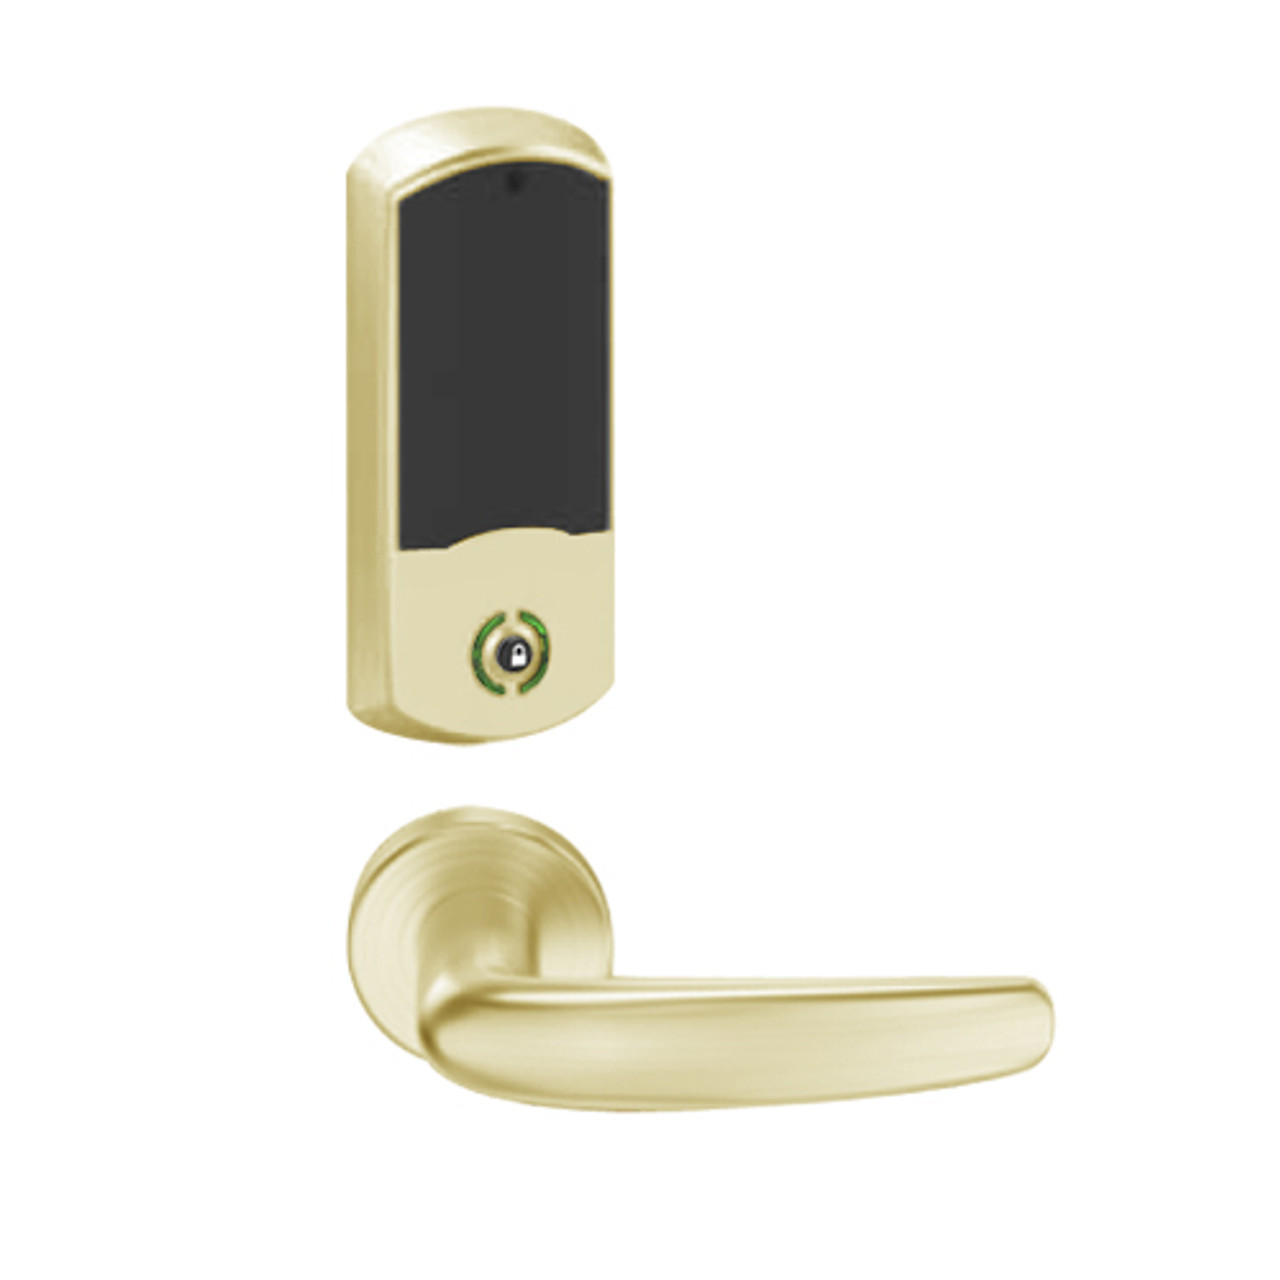 LEMB-GRW-P-07-606-00B Schlage Privacy/Office Wireless Greenwich Mortise Lock with Push Button & LED Indicator and Athens Lever in Satin Brass